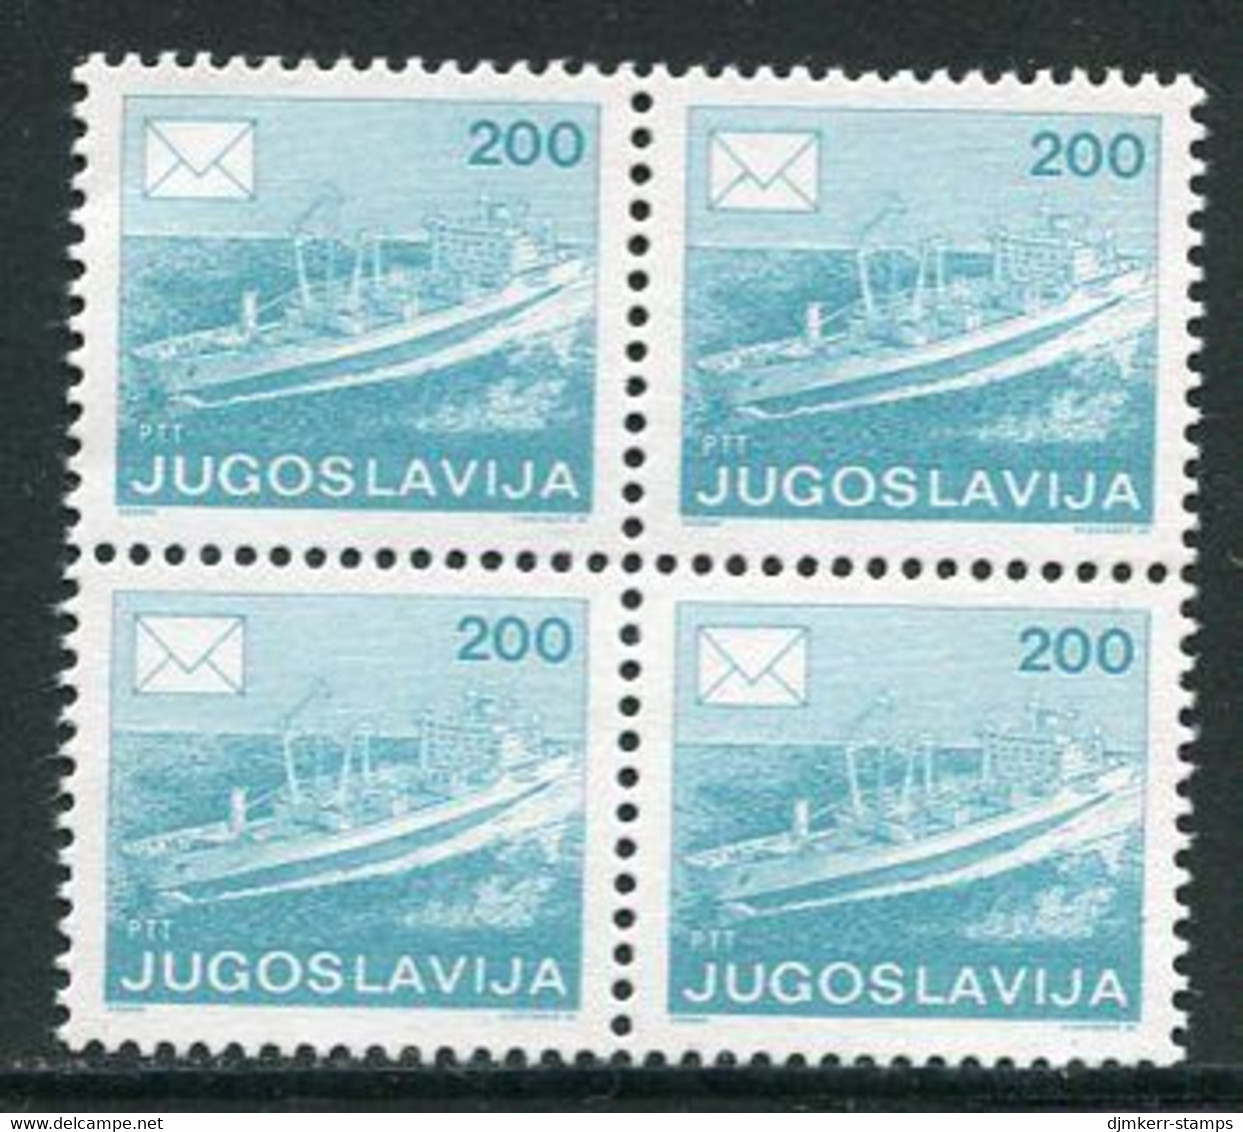 YUGOSLAVIA 1986 (1989) Postal Services Definitive 200 D. Perforated 12½ Block Of 4 MNH / **.  Michel 2176D - Neufs